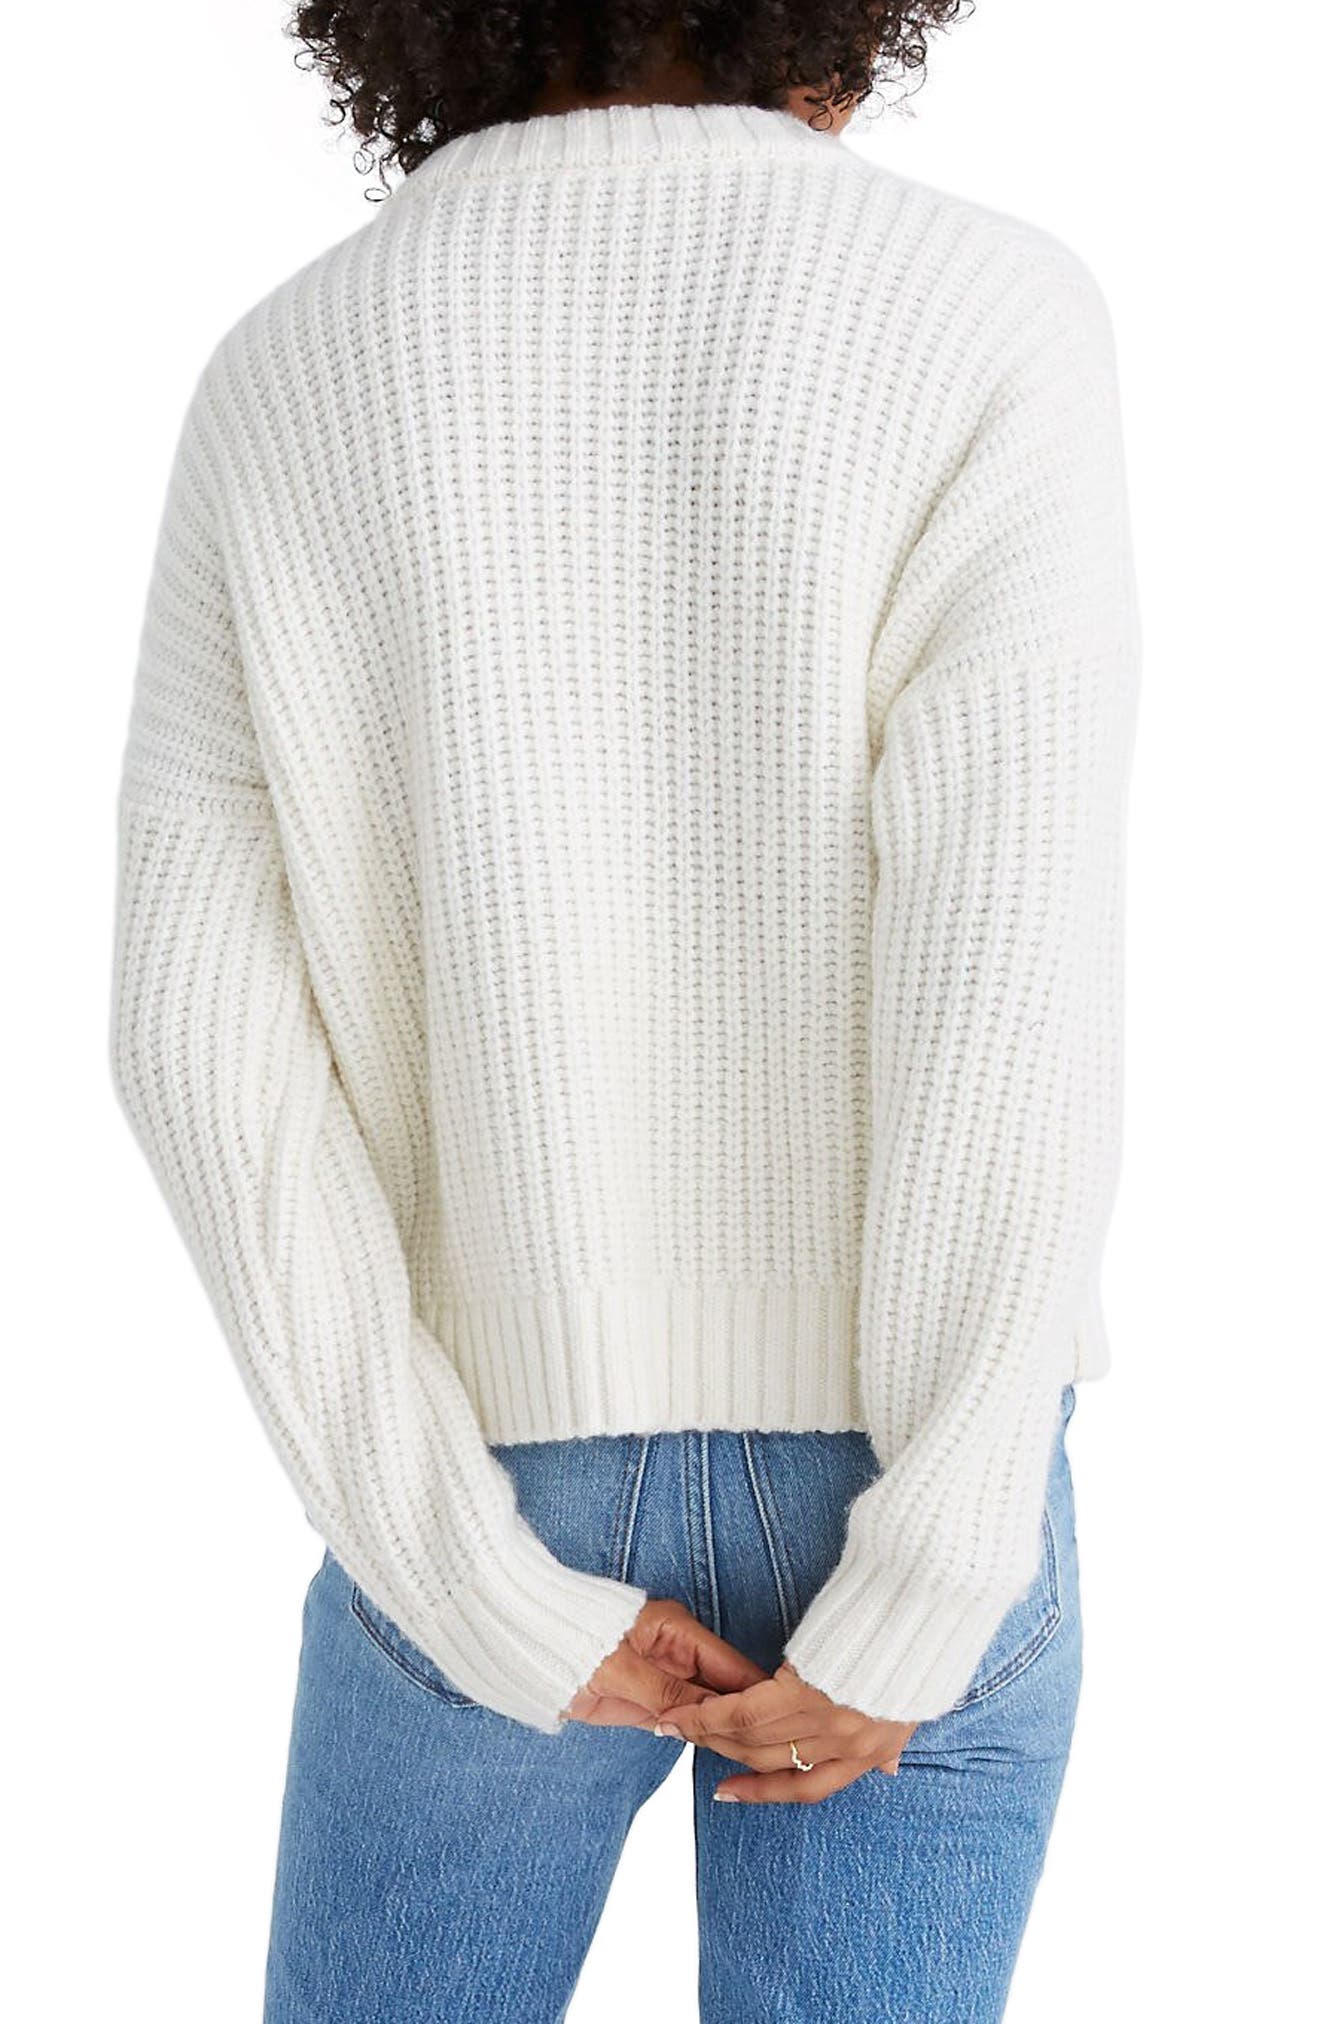 Madewell | Everett Cable Knit Sweater | Nordstrom Rack